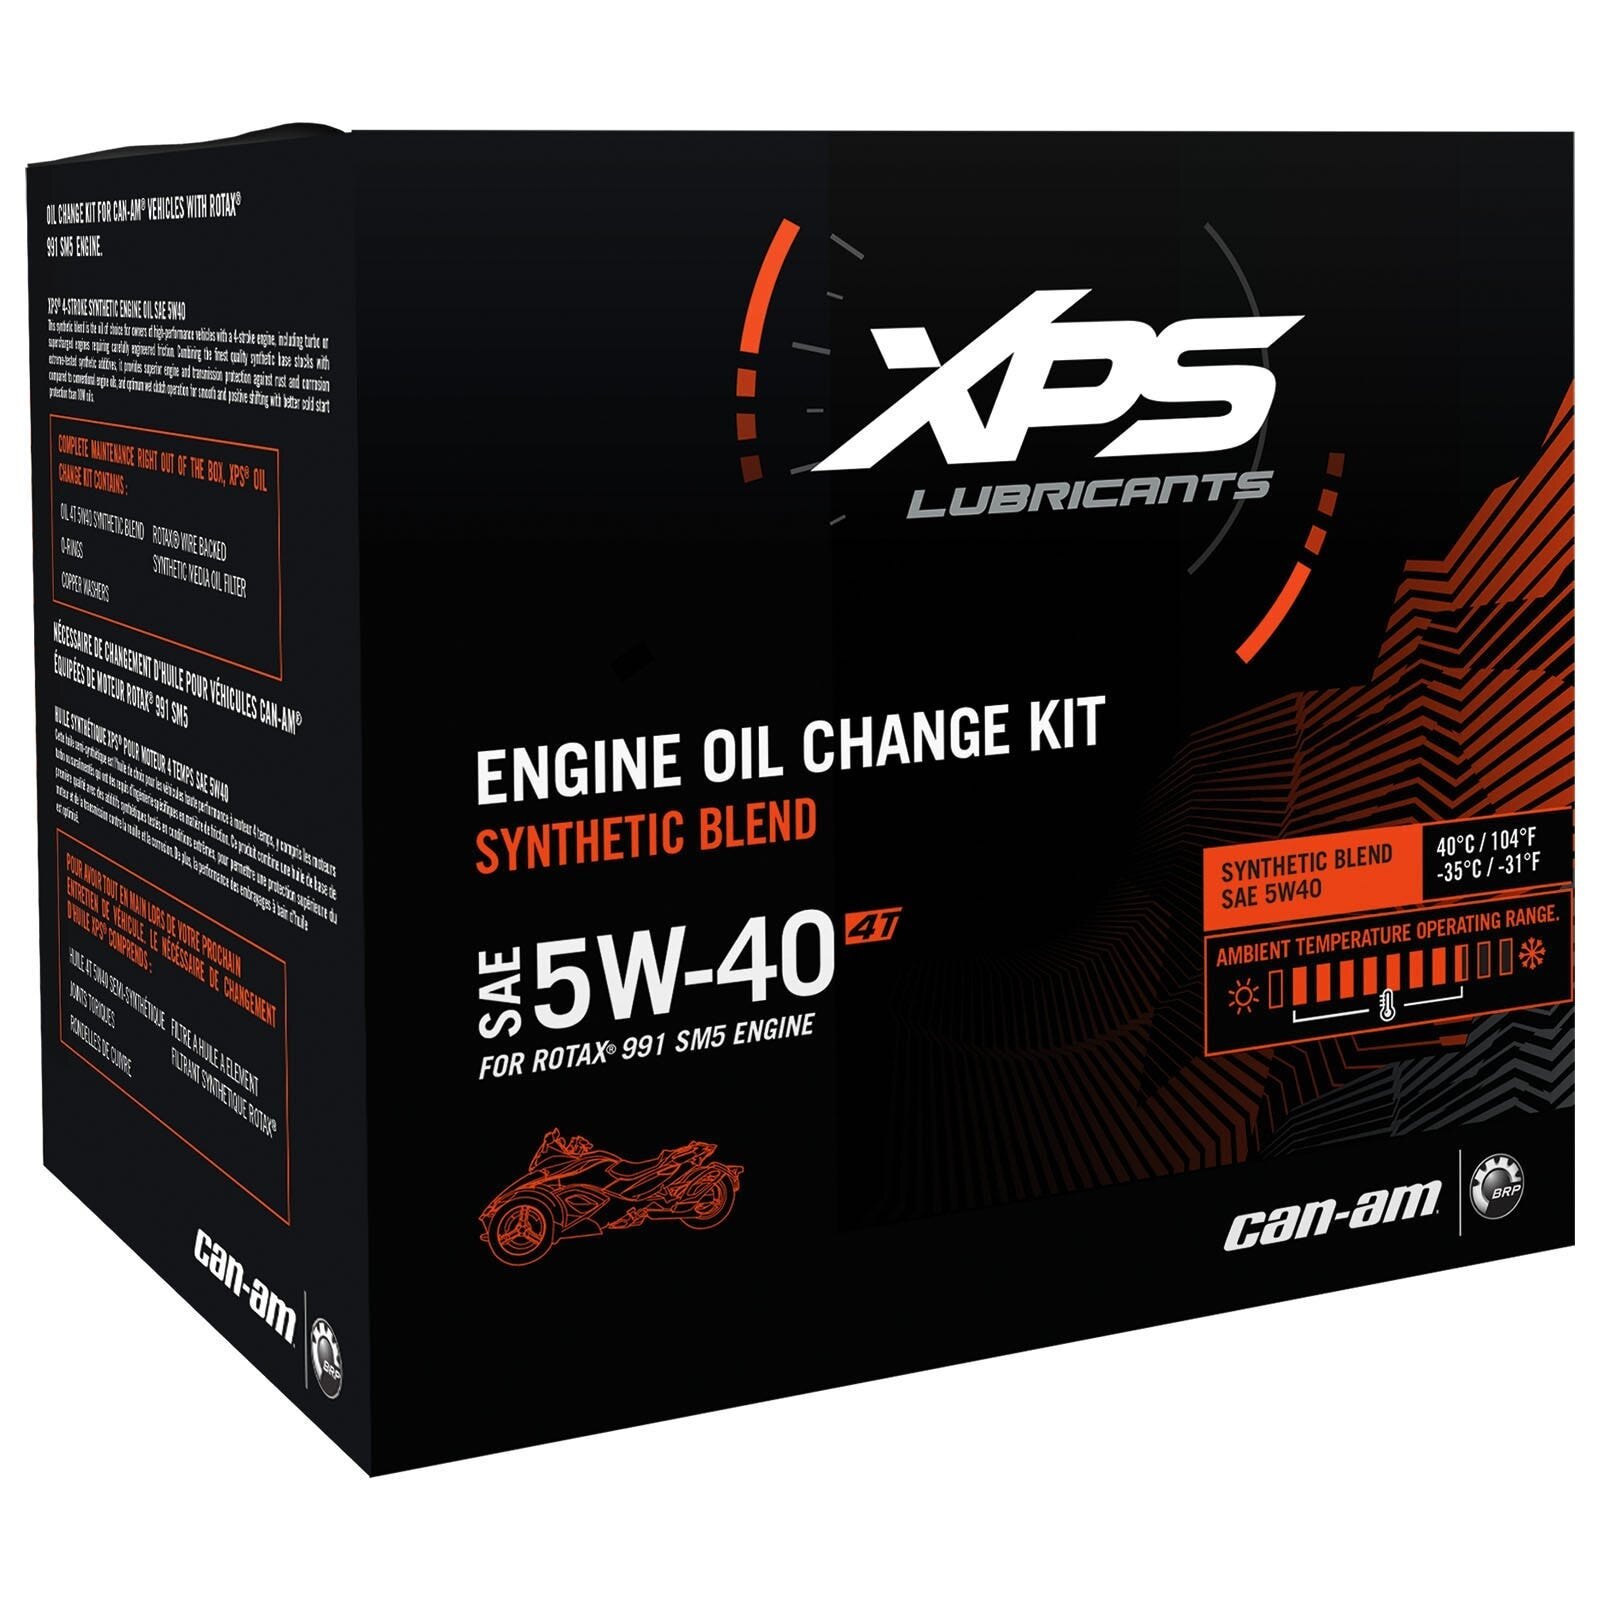 4T 5W 40 Synthetic Blend Oil Change Kit for Rotax 991 (SM5) engine